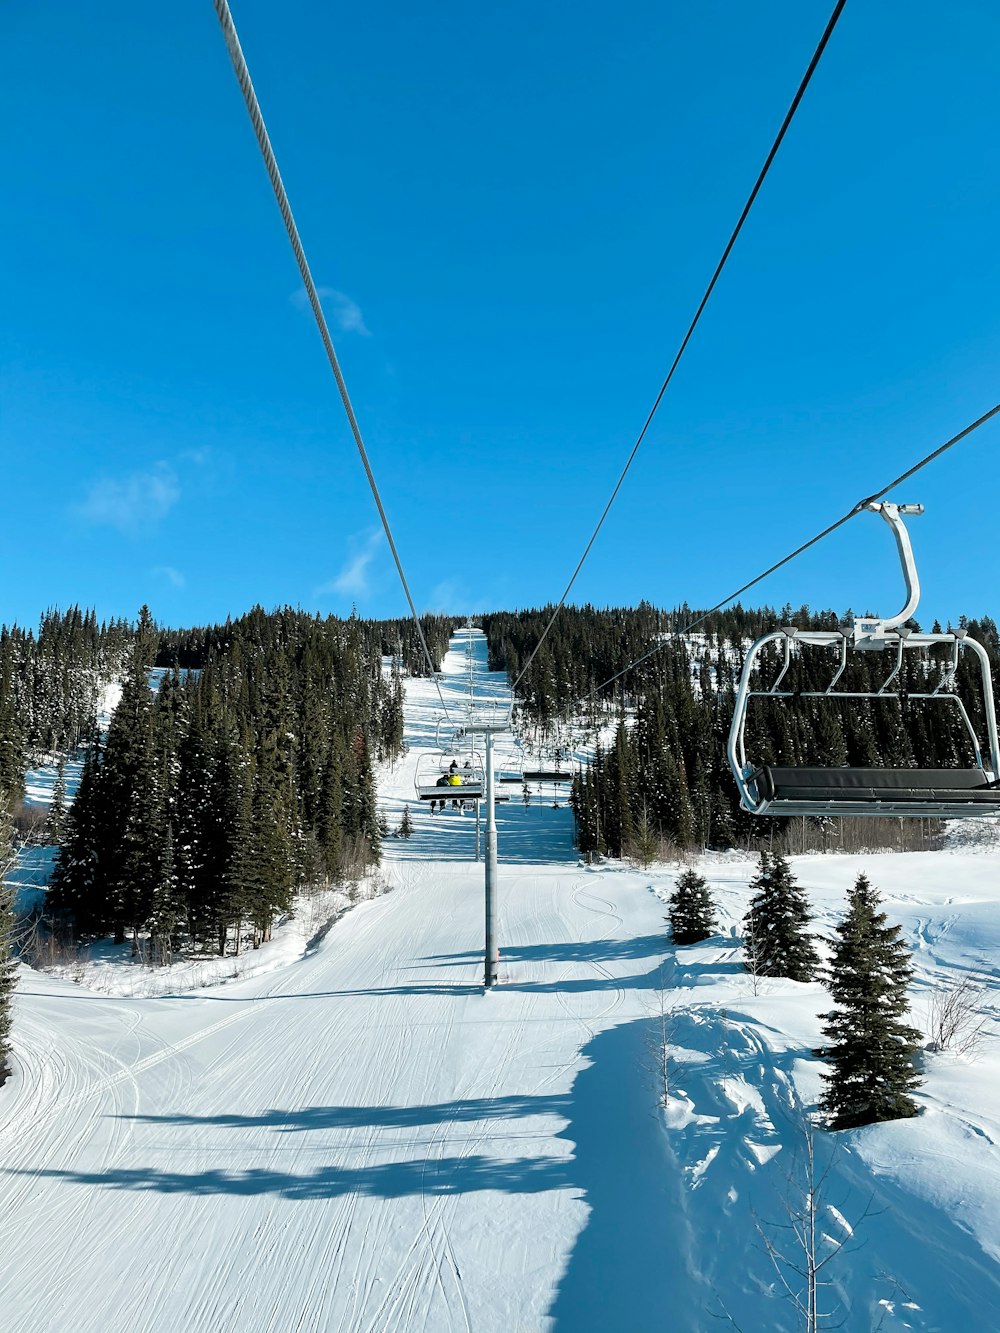 snow covered trees and cable cars under blue sky during daytime